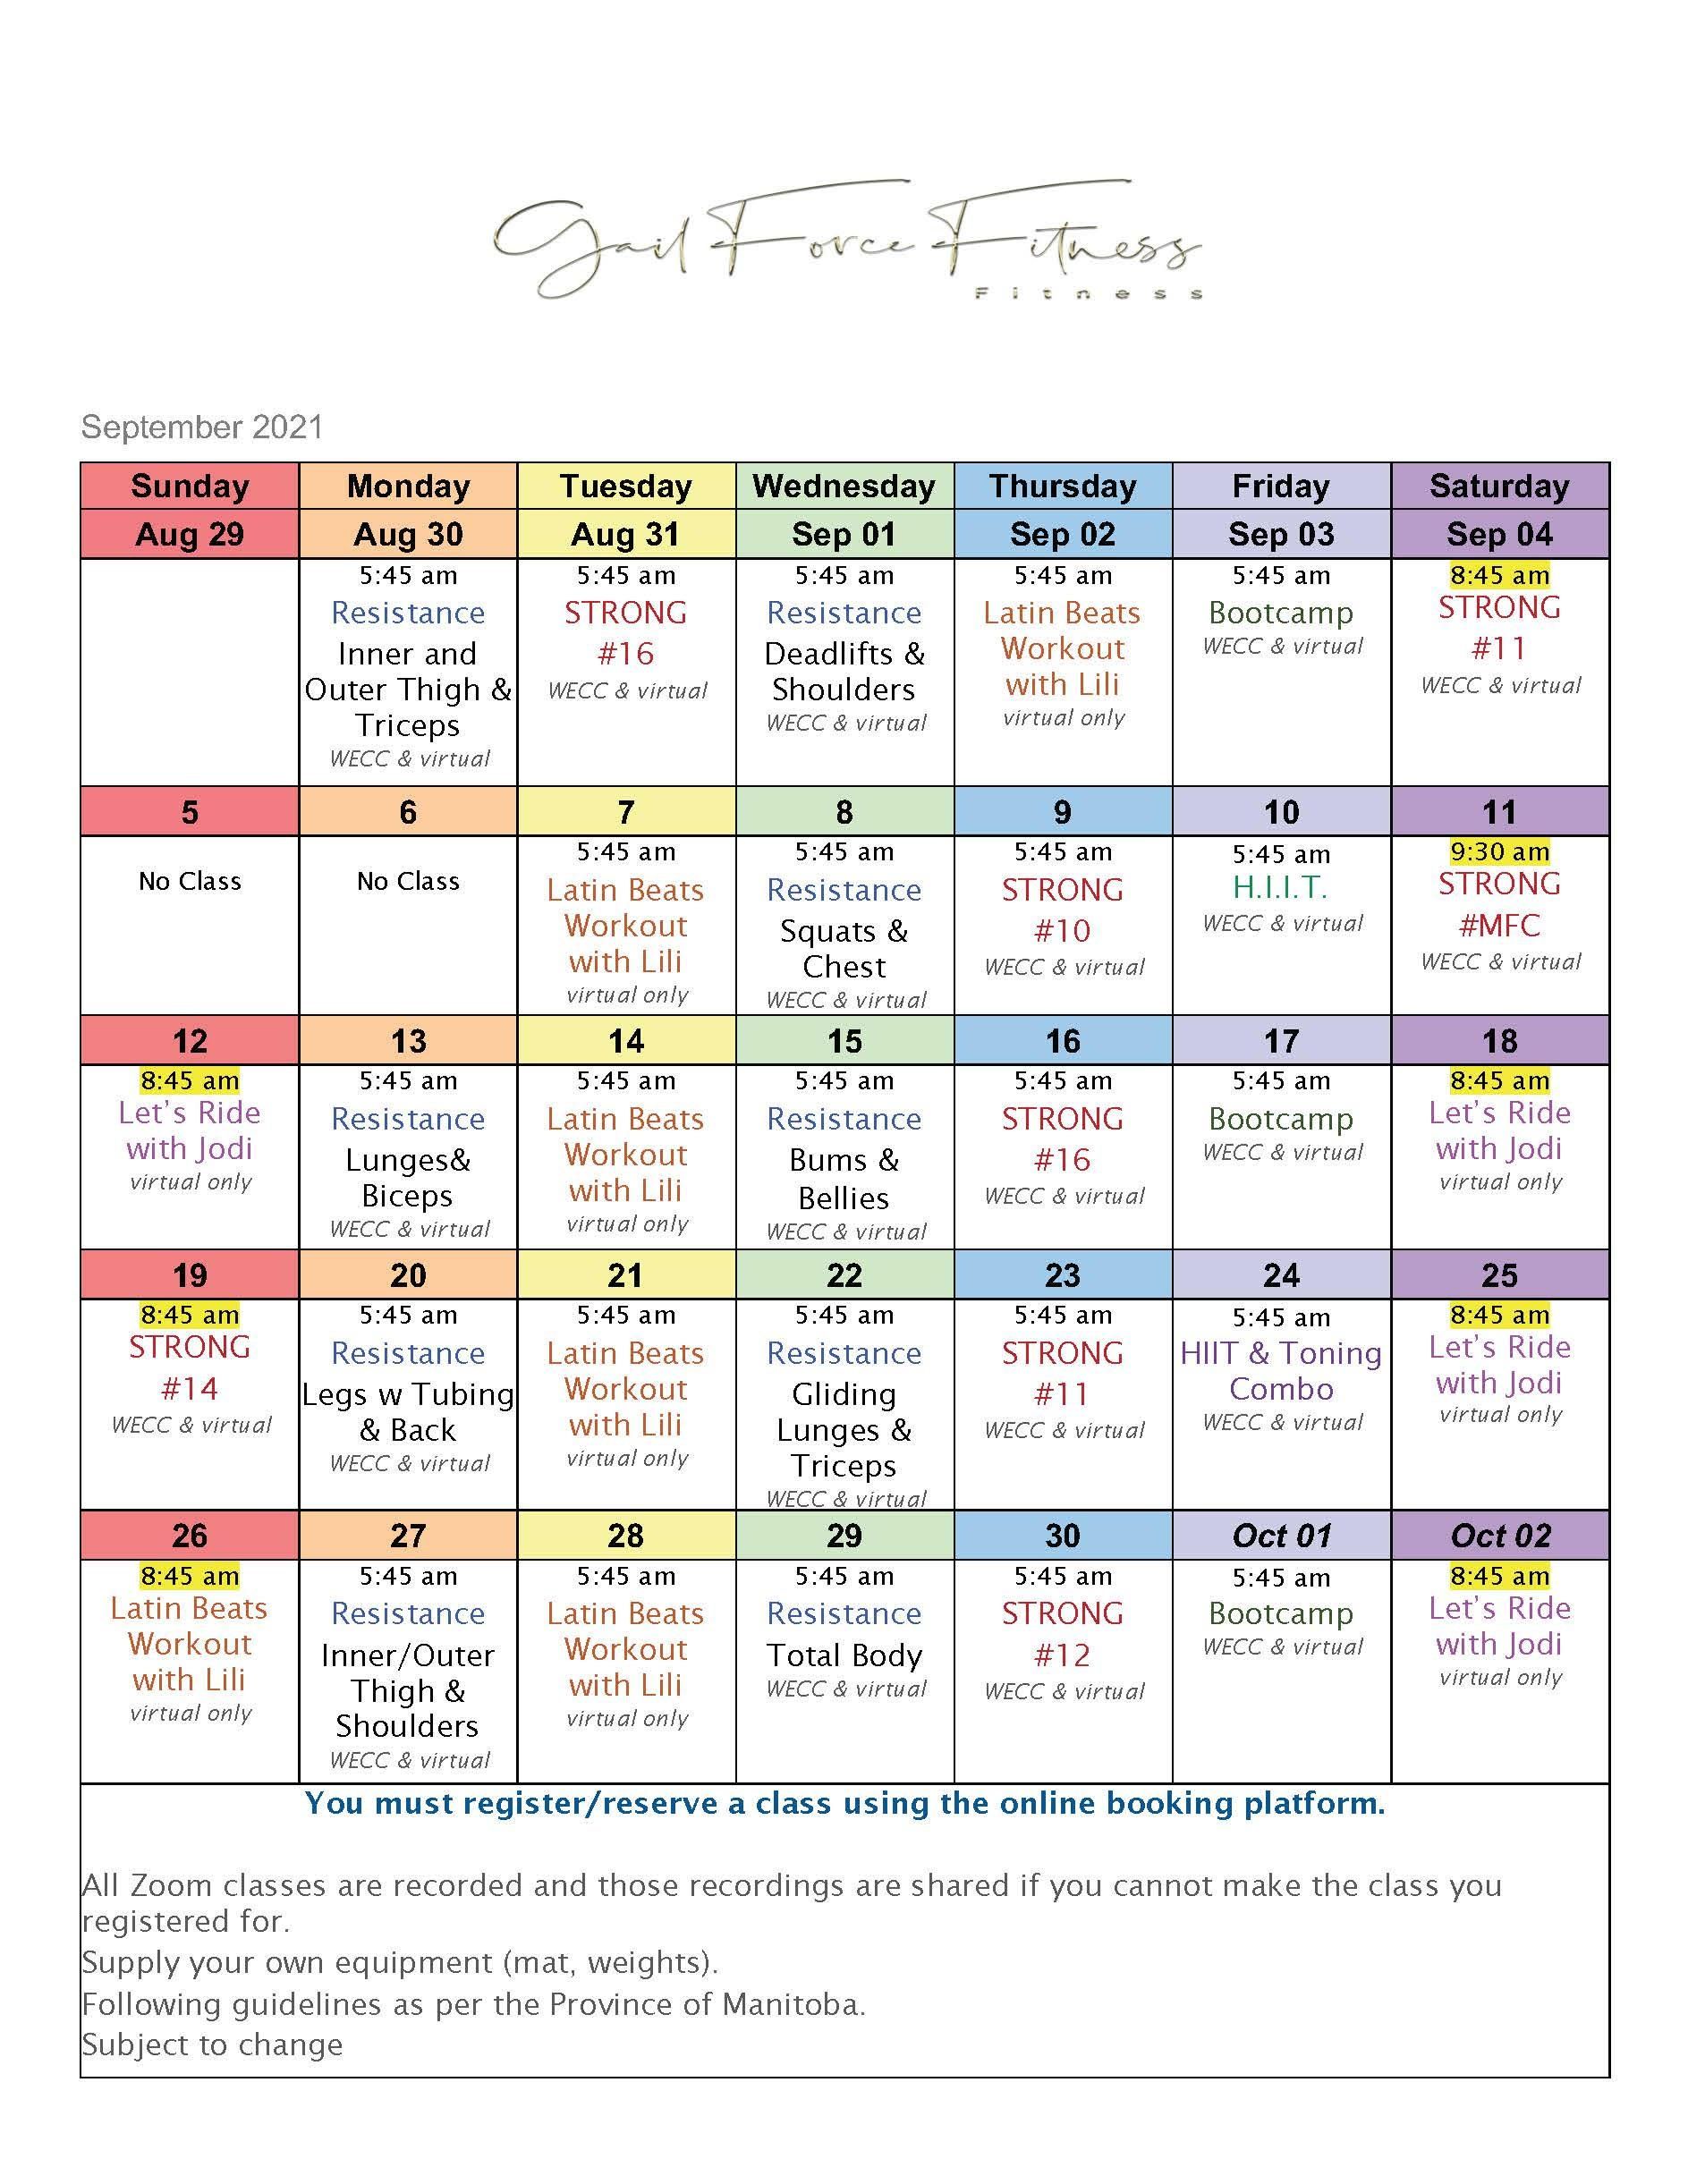 September 2021 Schedule Gail Force Fitness